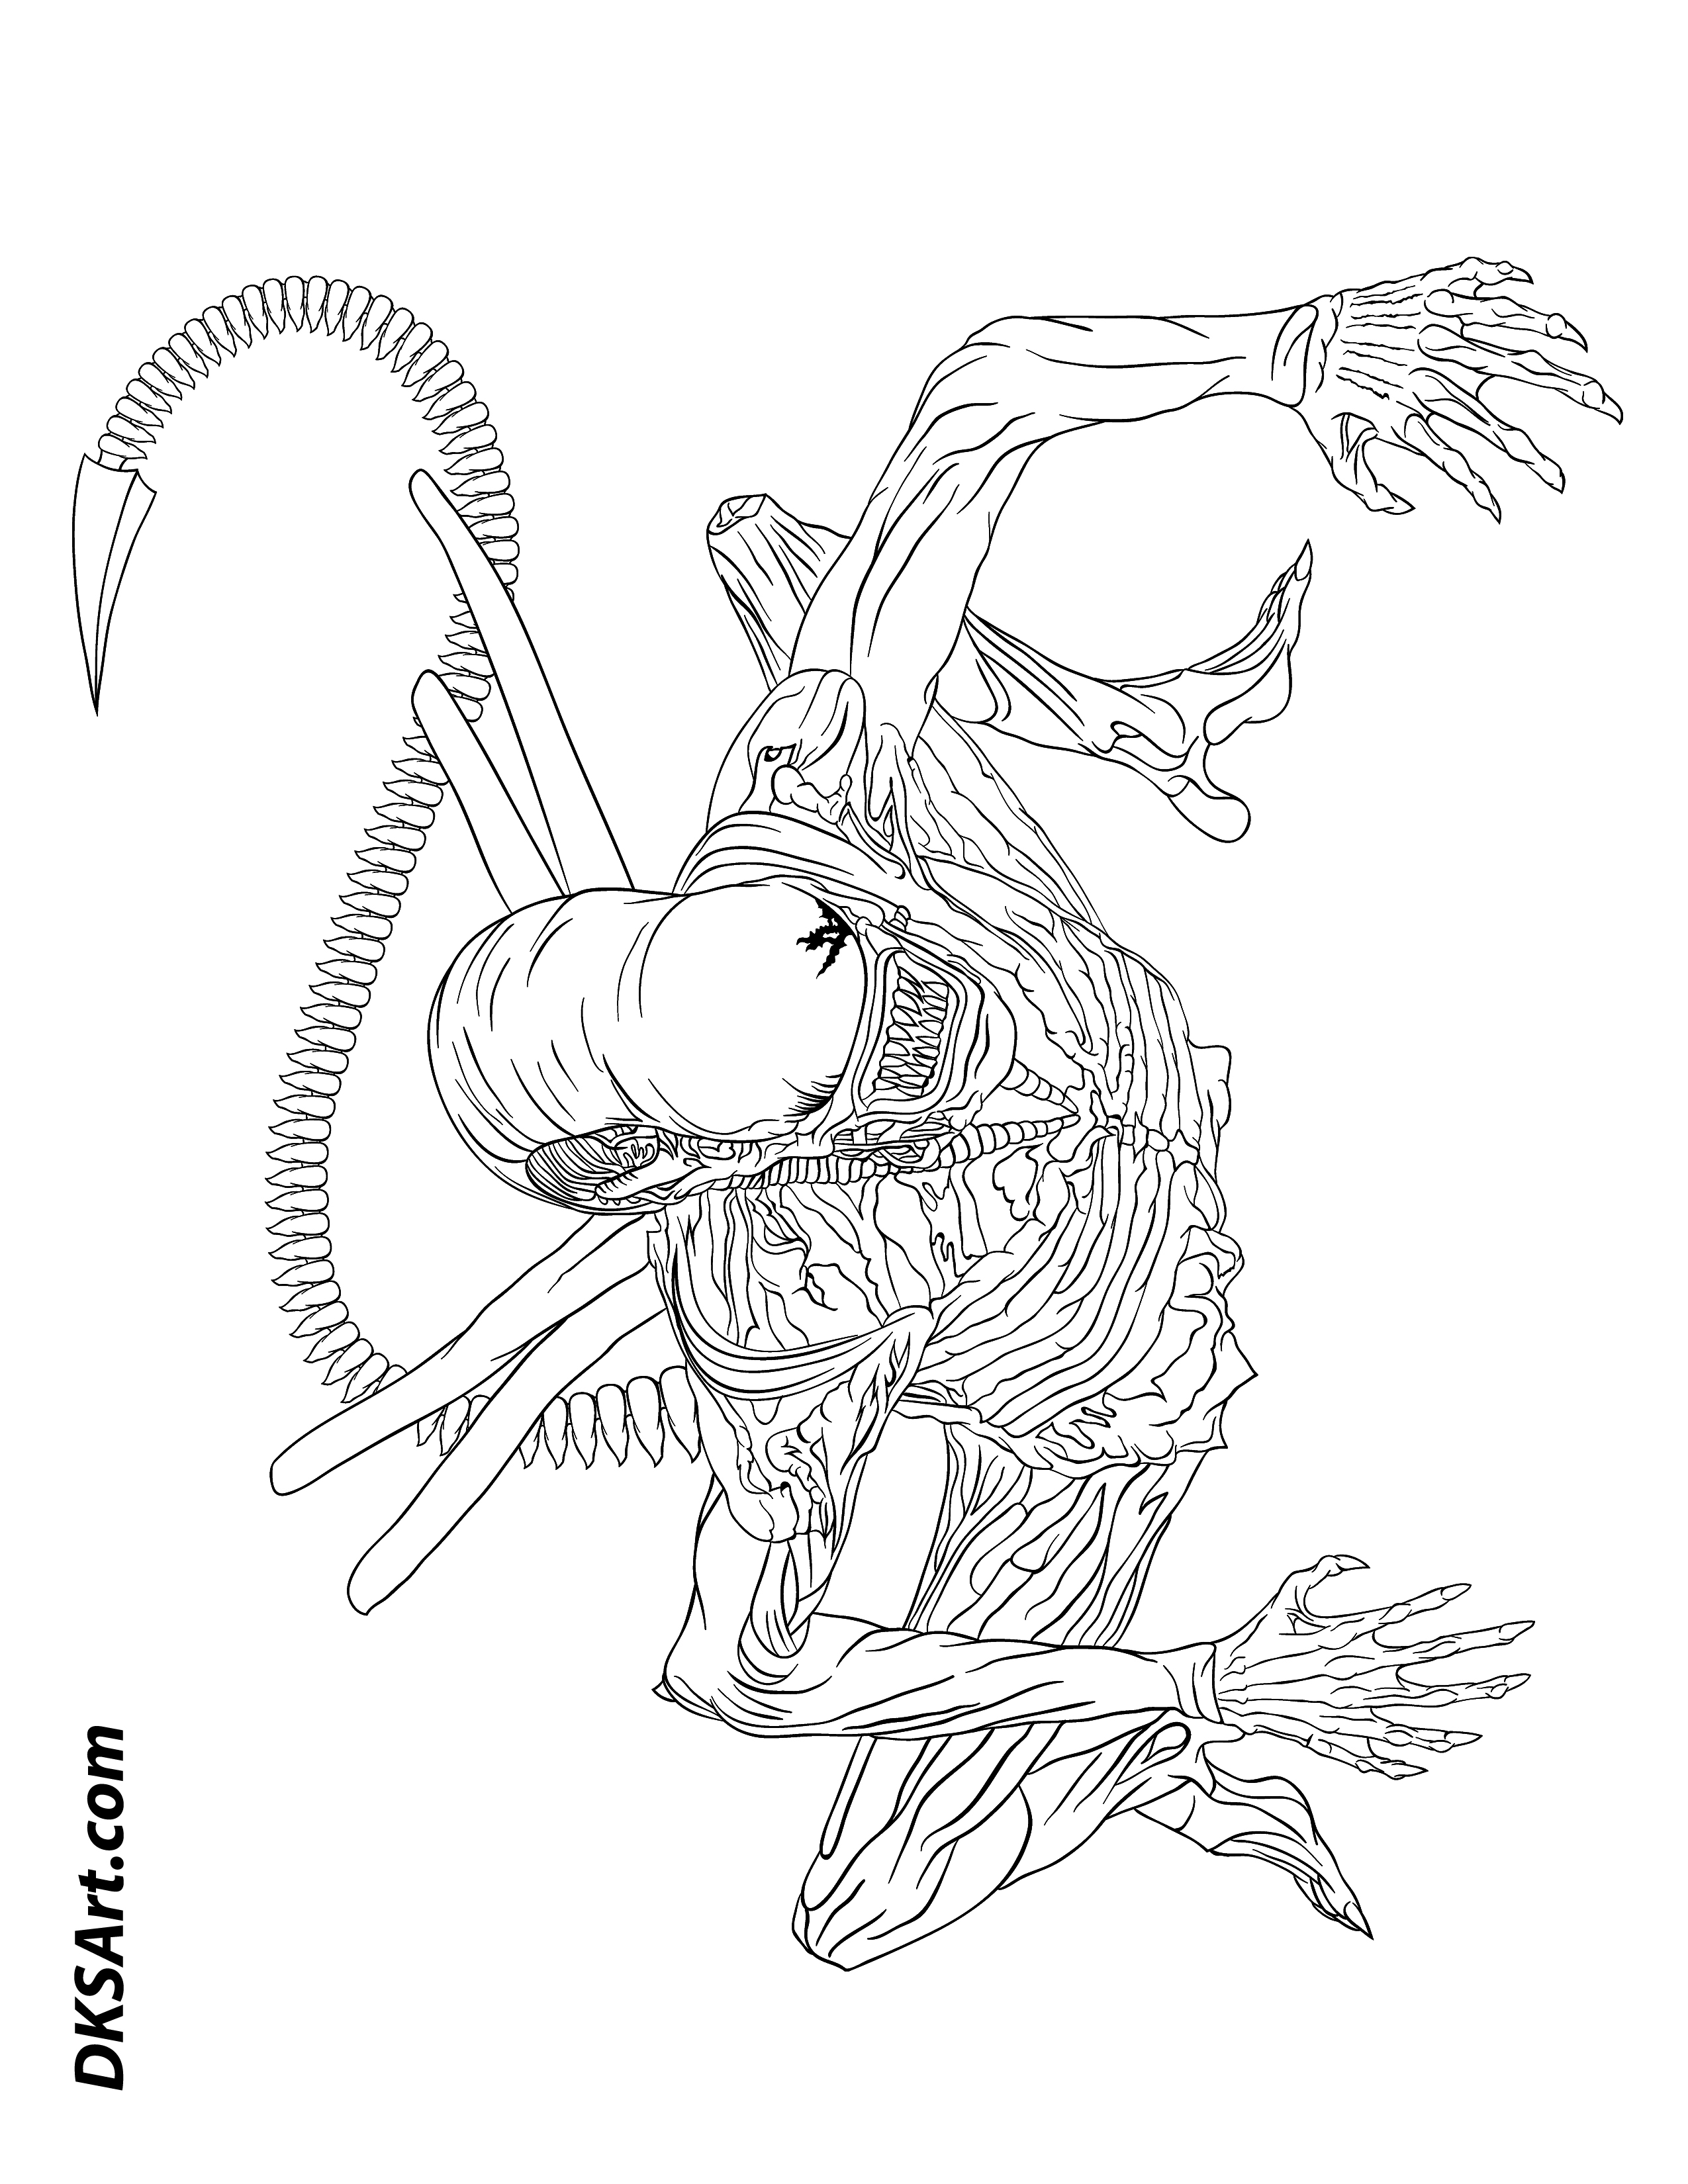 Download Xenomorph Coloring Pages - Bowstomatch